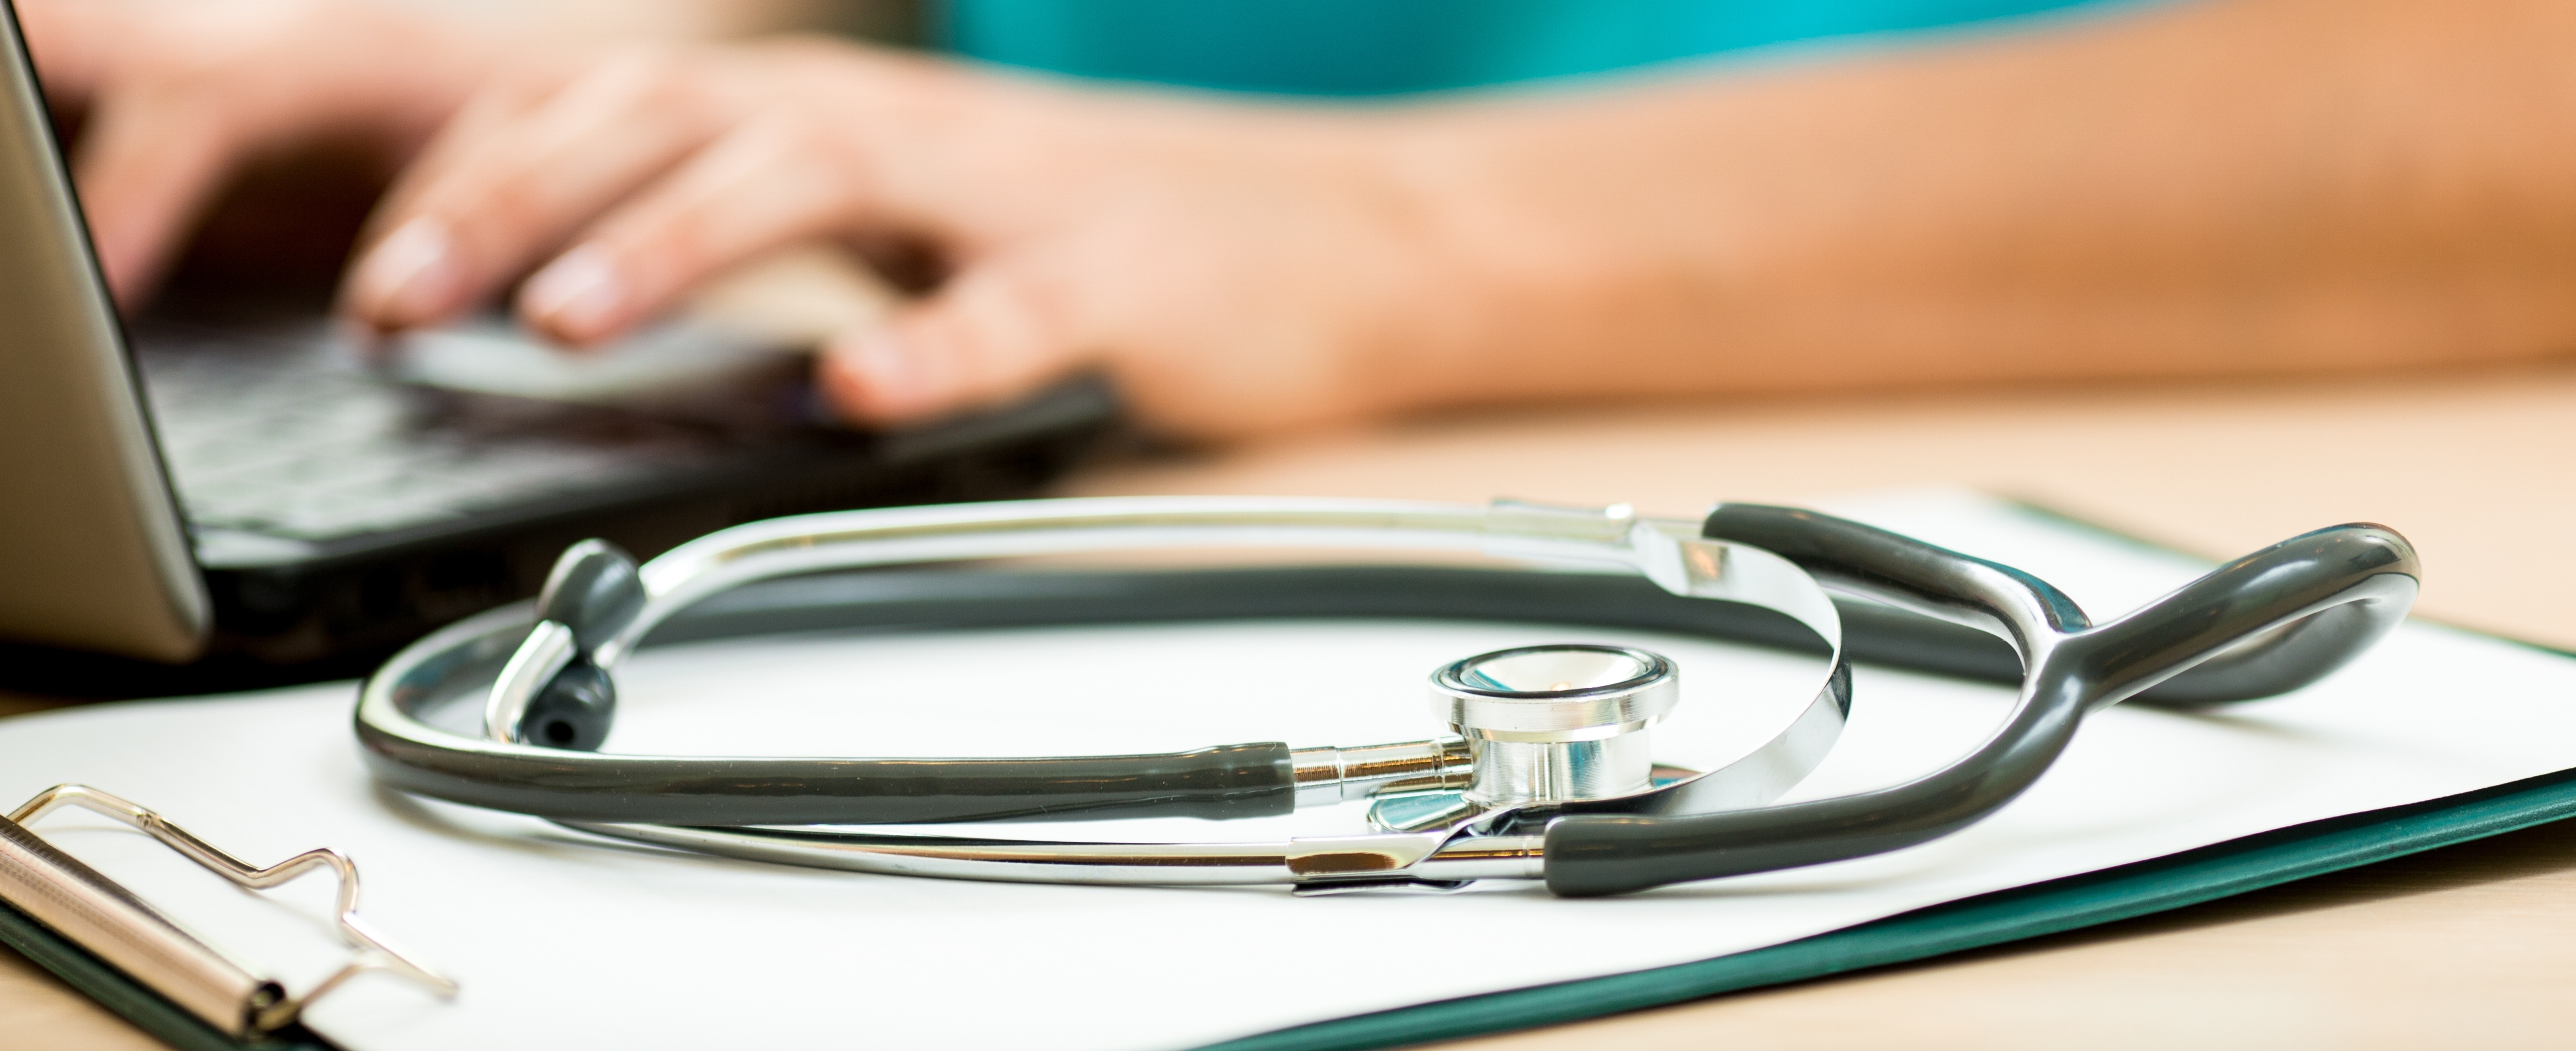 2015 Performance Scores Released on Physician Compare Website